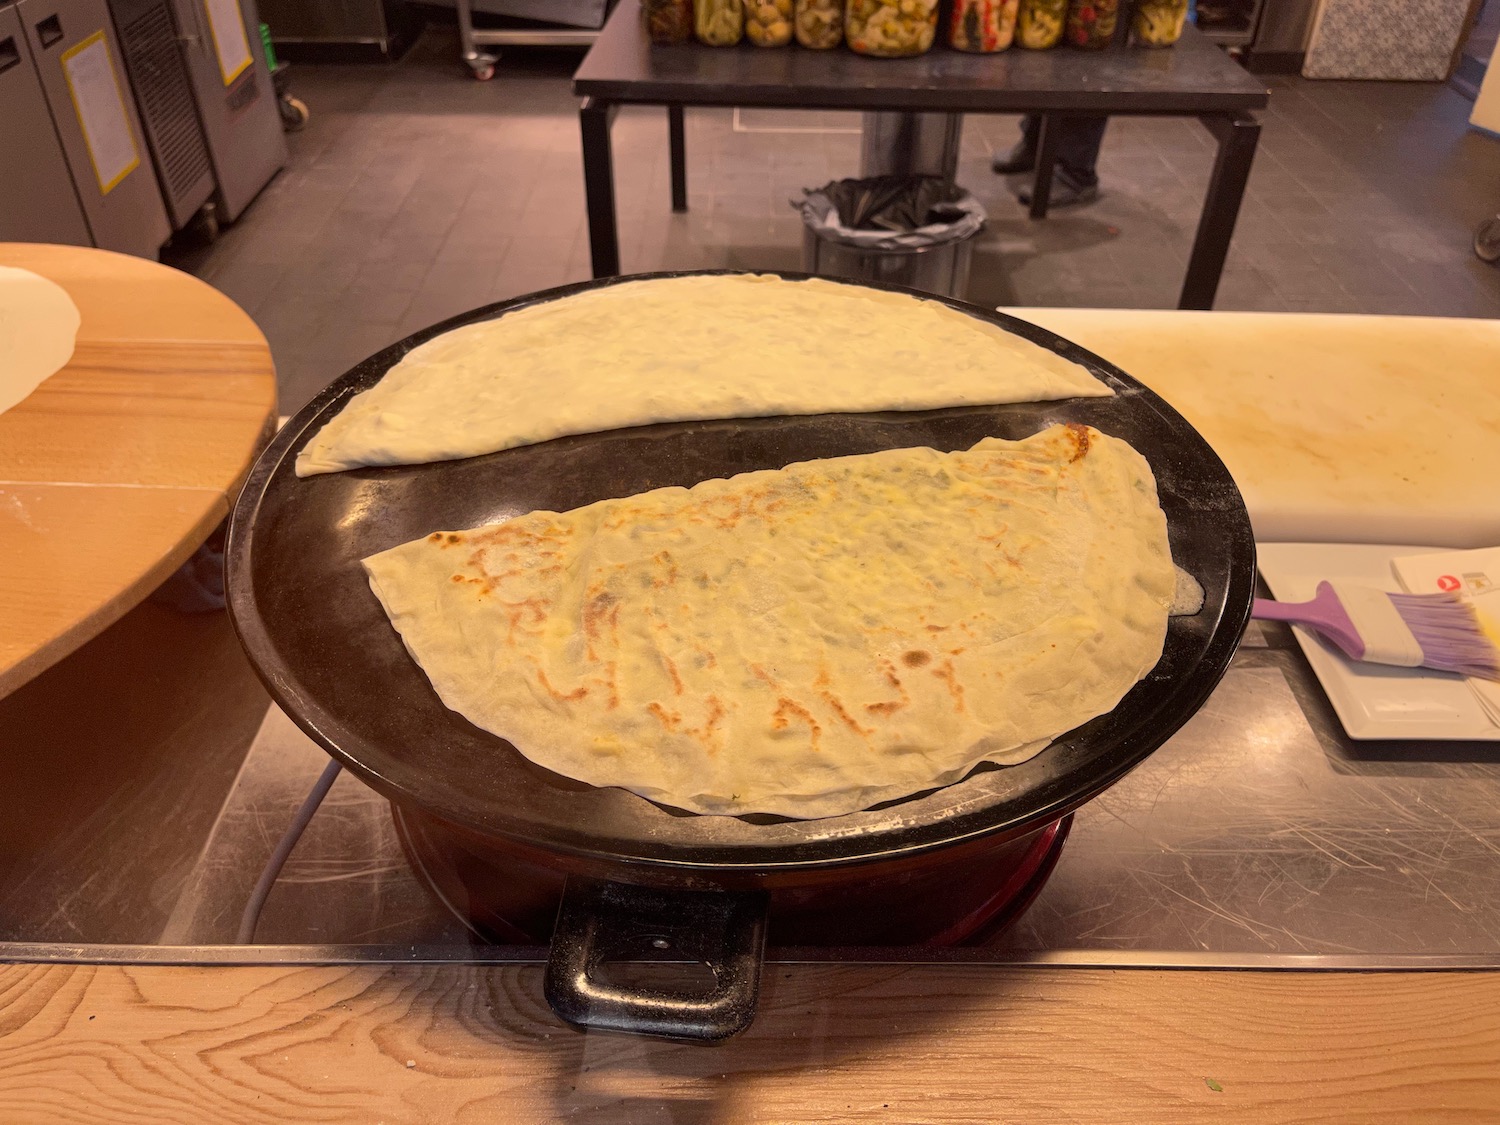 a pancake cooking on a stove